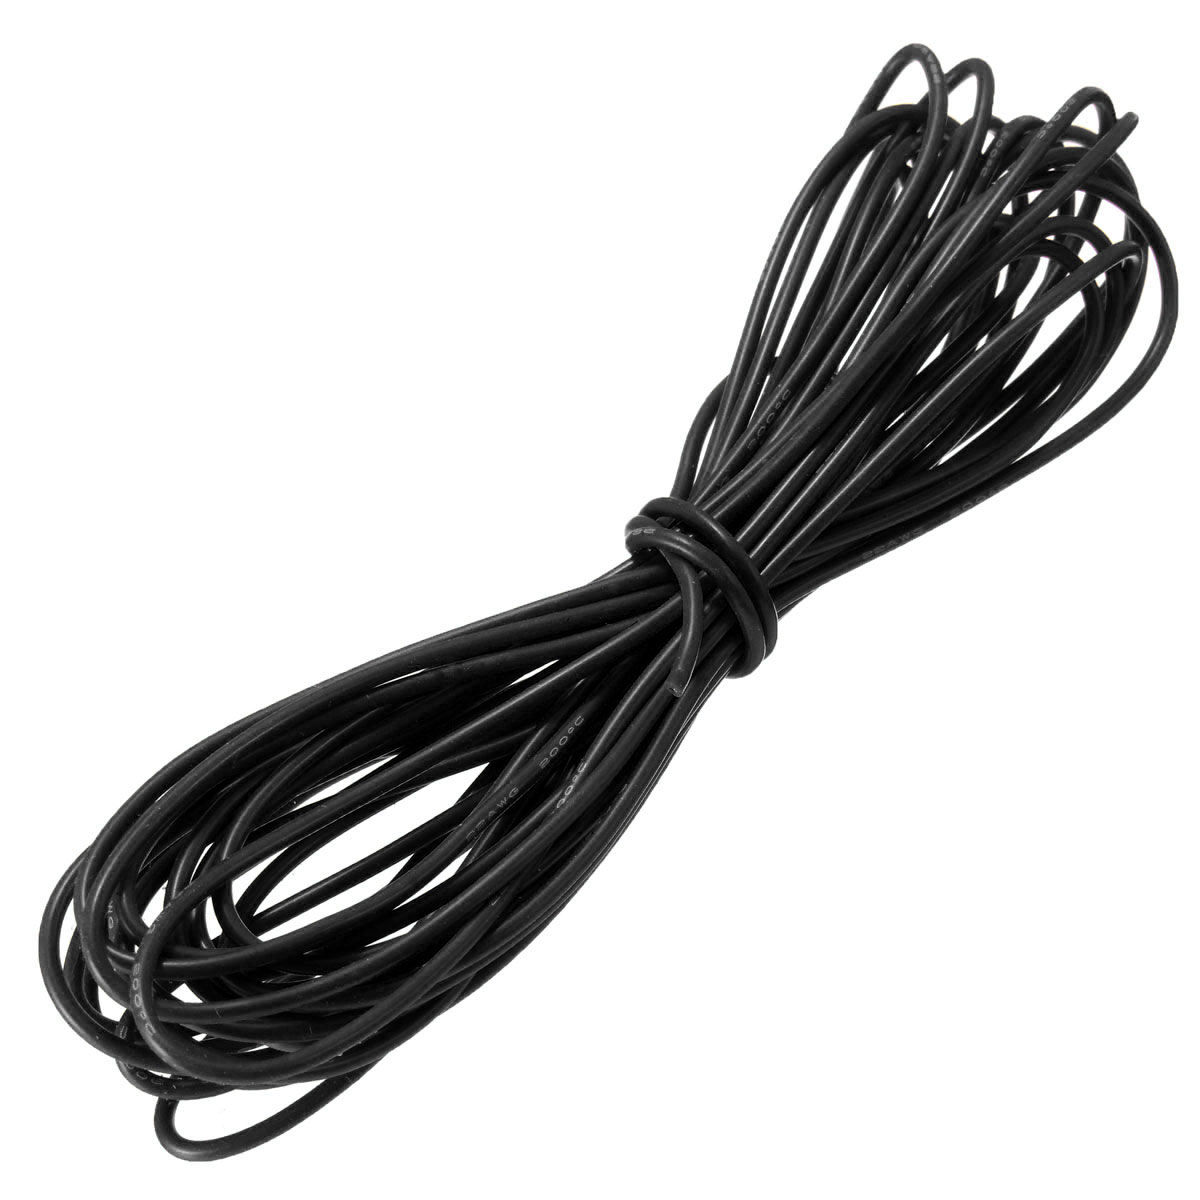 DANIU-5-Meter-Black-Silicone-Wire-Cable-10121416182022AWG-Flexible-Cable-1170293-6